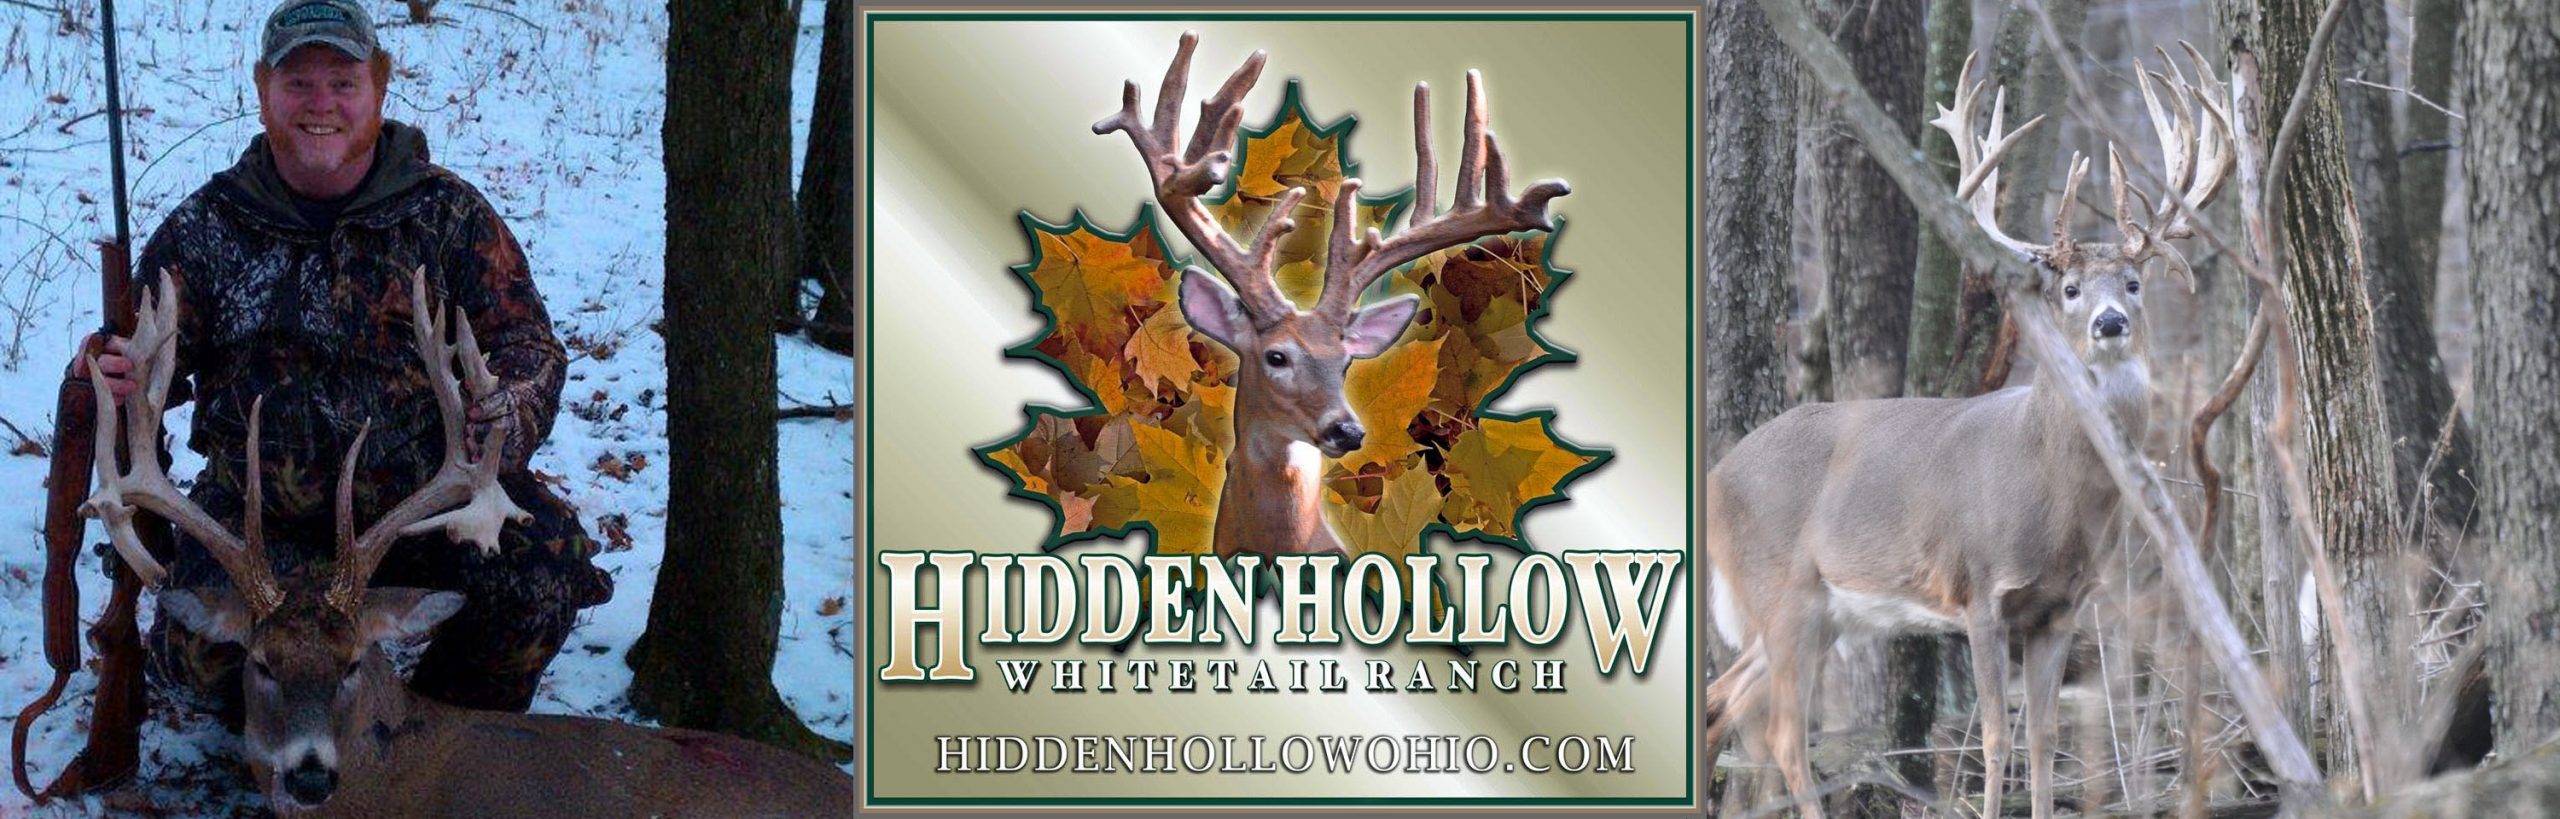 hidden hollow whitetail header -- guided whitetail hunts ohio